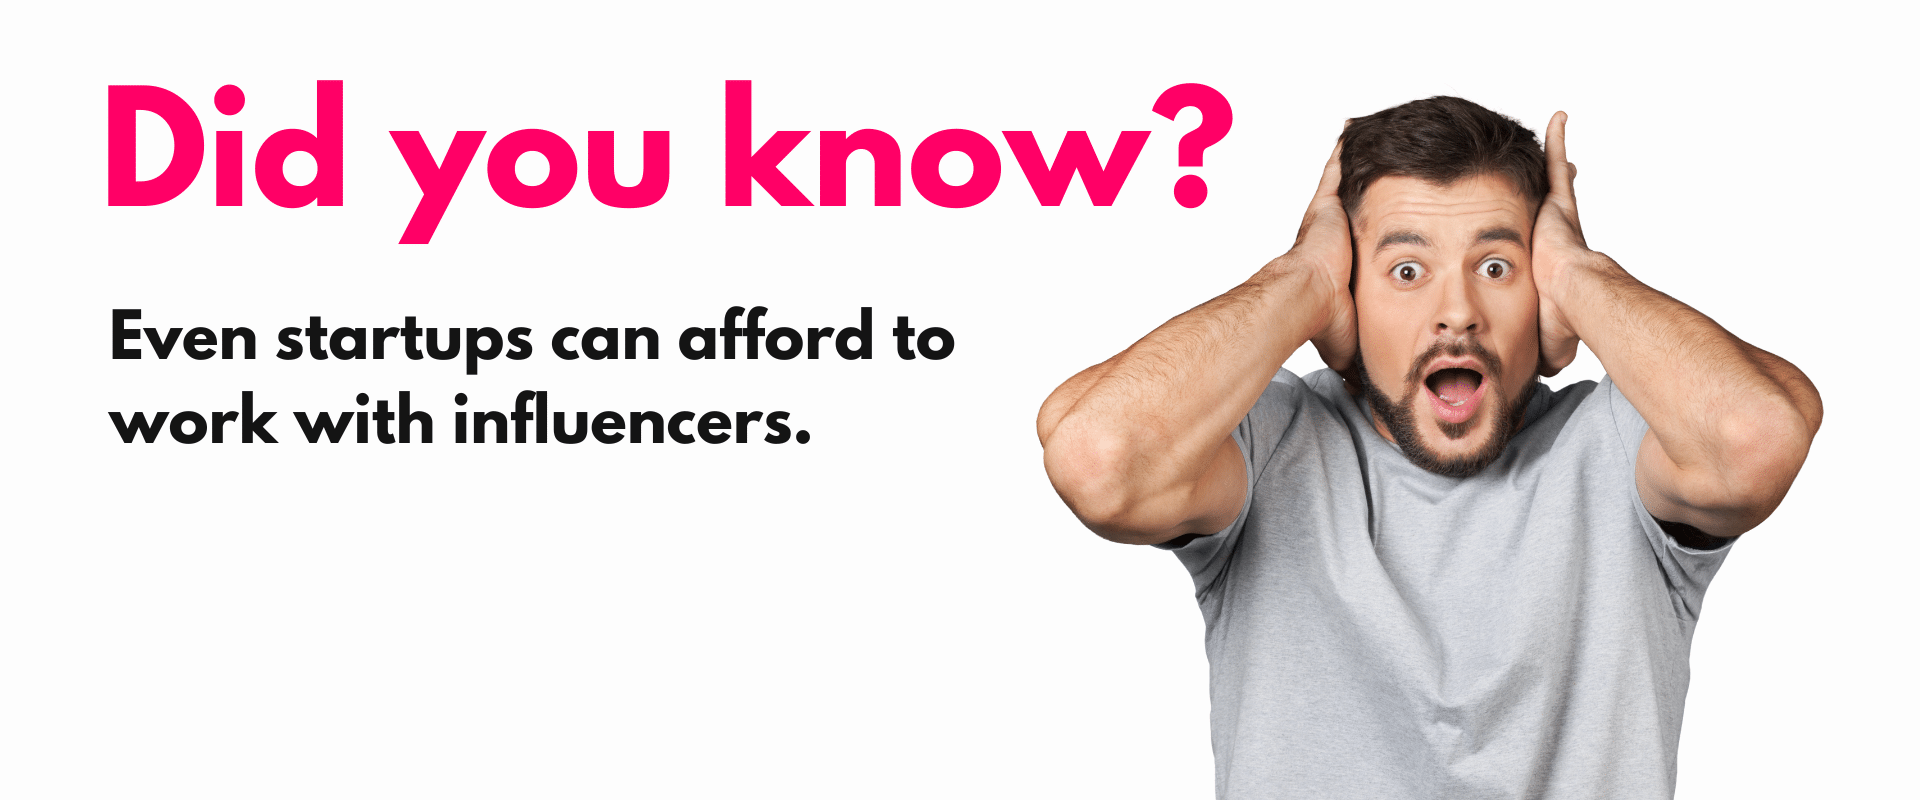 Influencer marketing for startups. Did you know? every startups can afford to work with influencers.